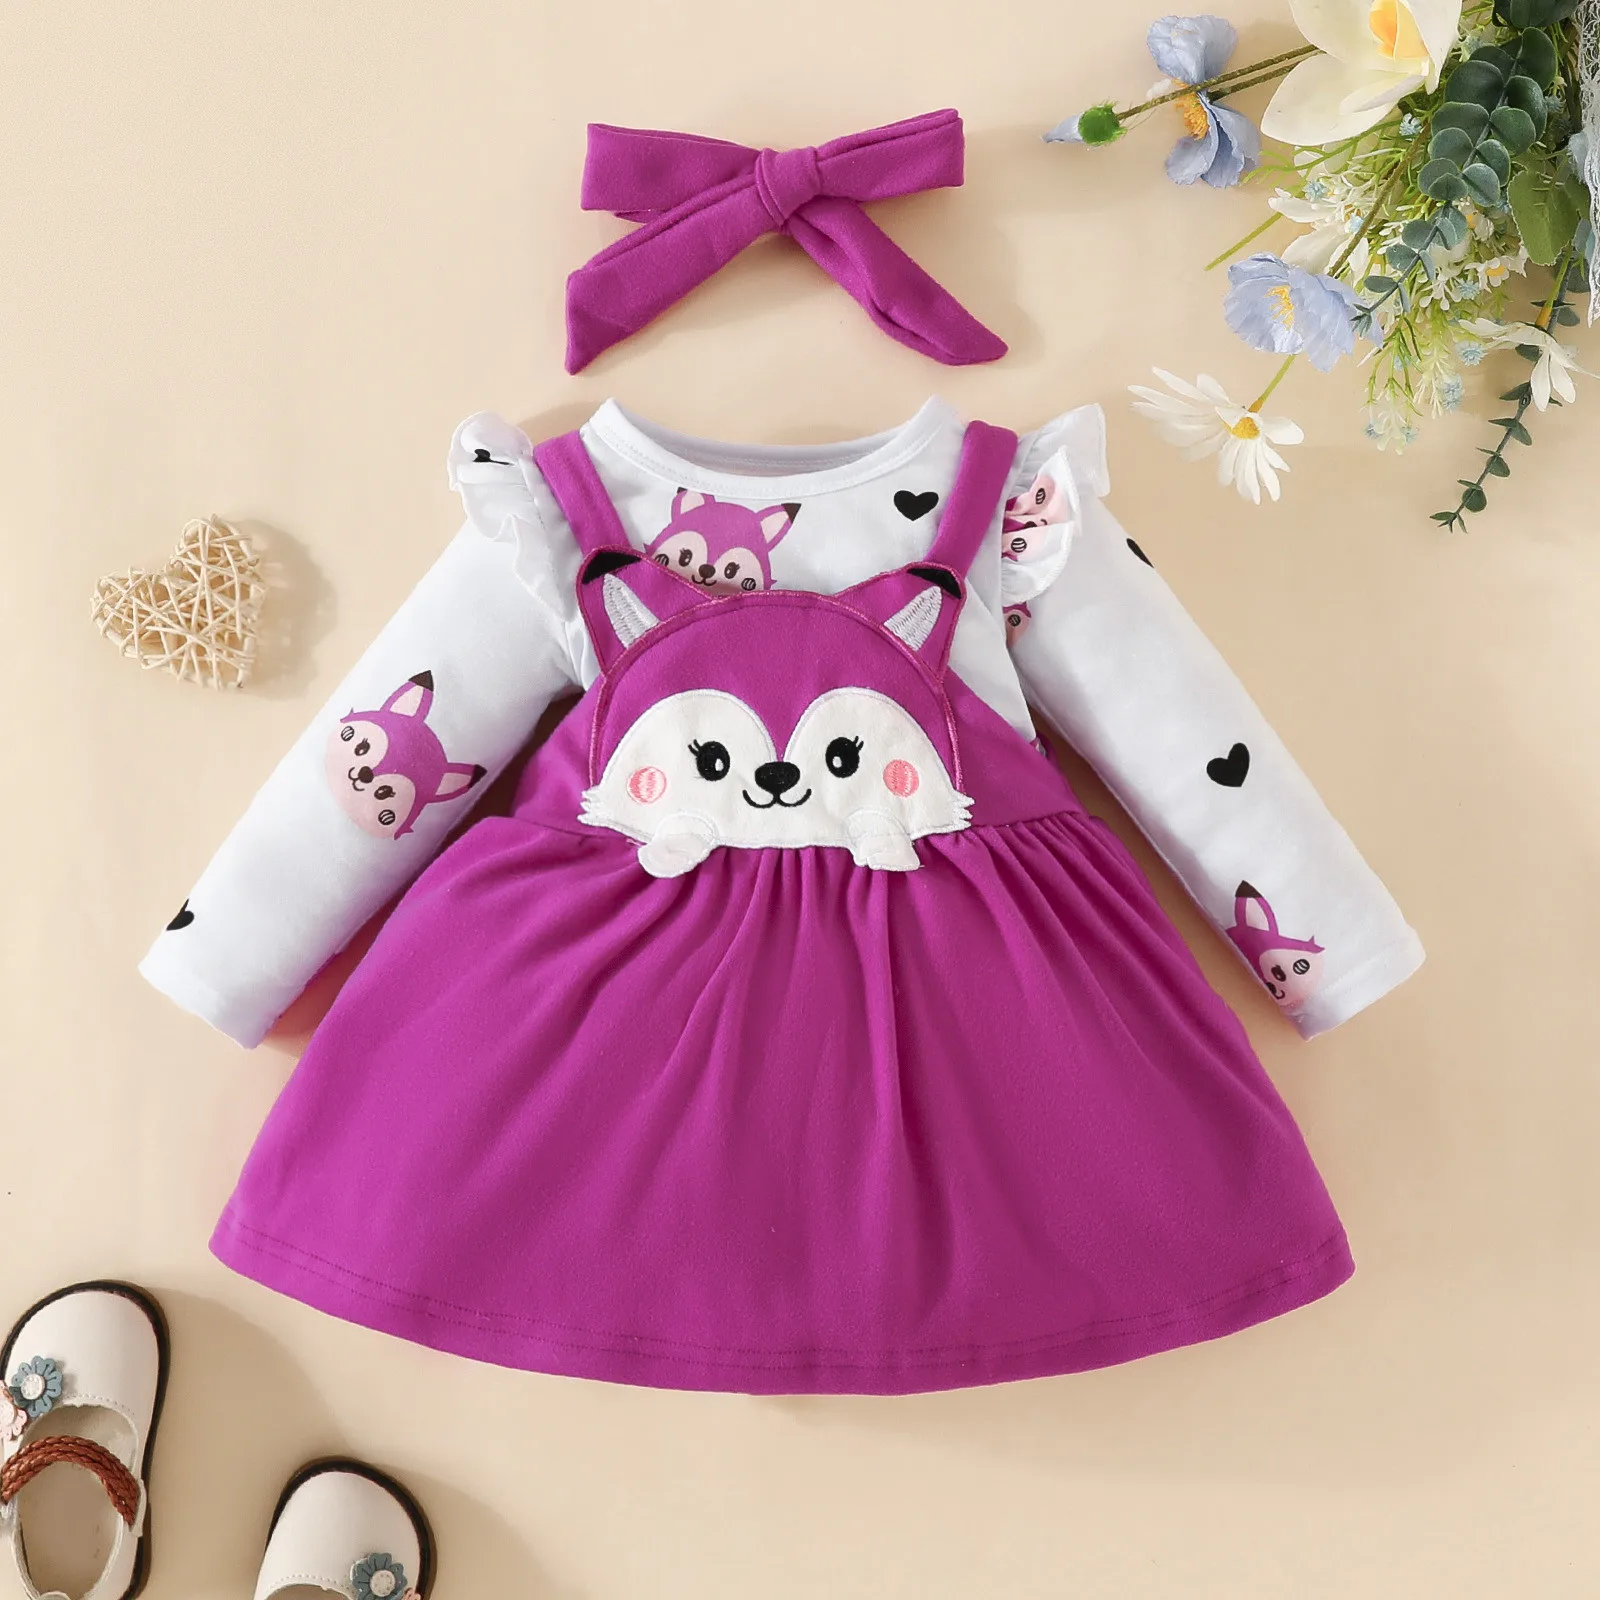 

Infant Toddler Girls Long Sleeve Cartoon Print Romper Bodysuits Suspenders Skirts Bow Tie Headbands Outfits